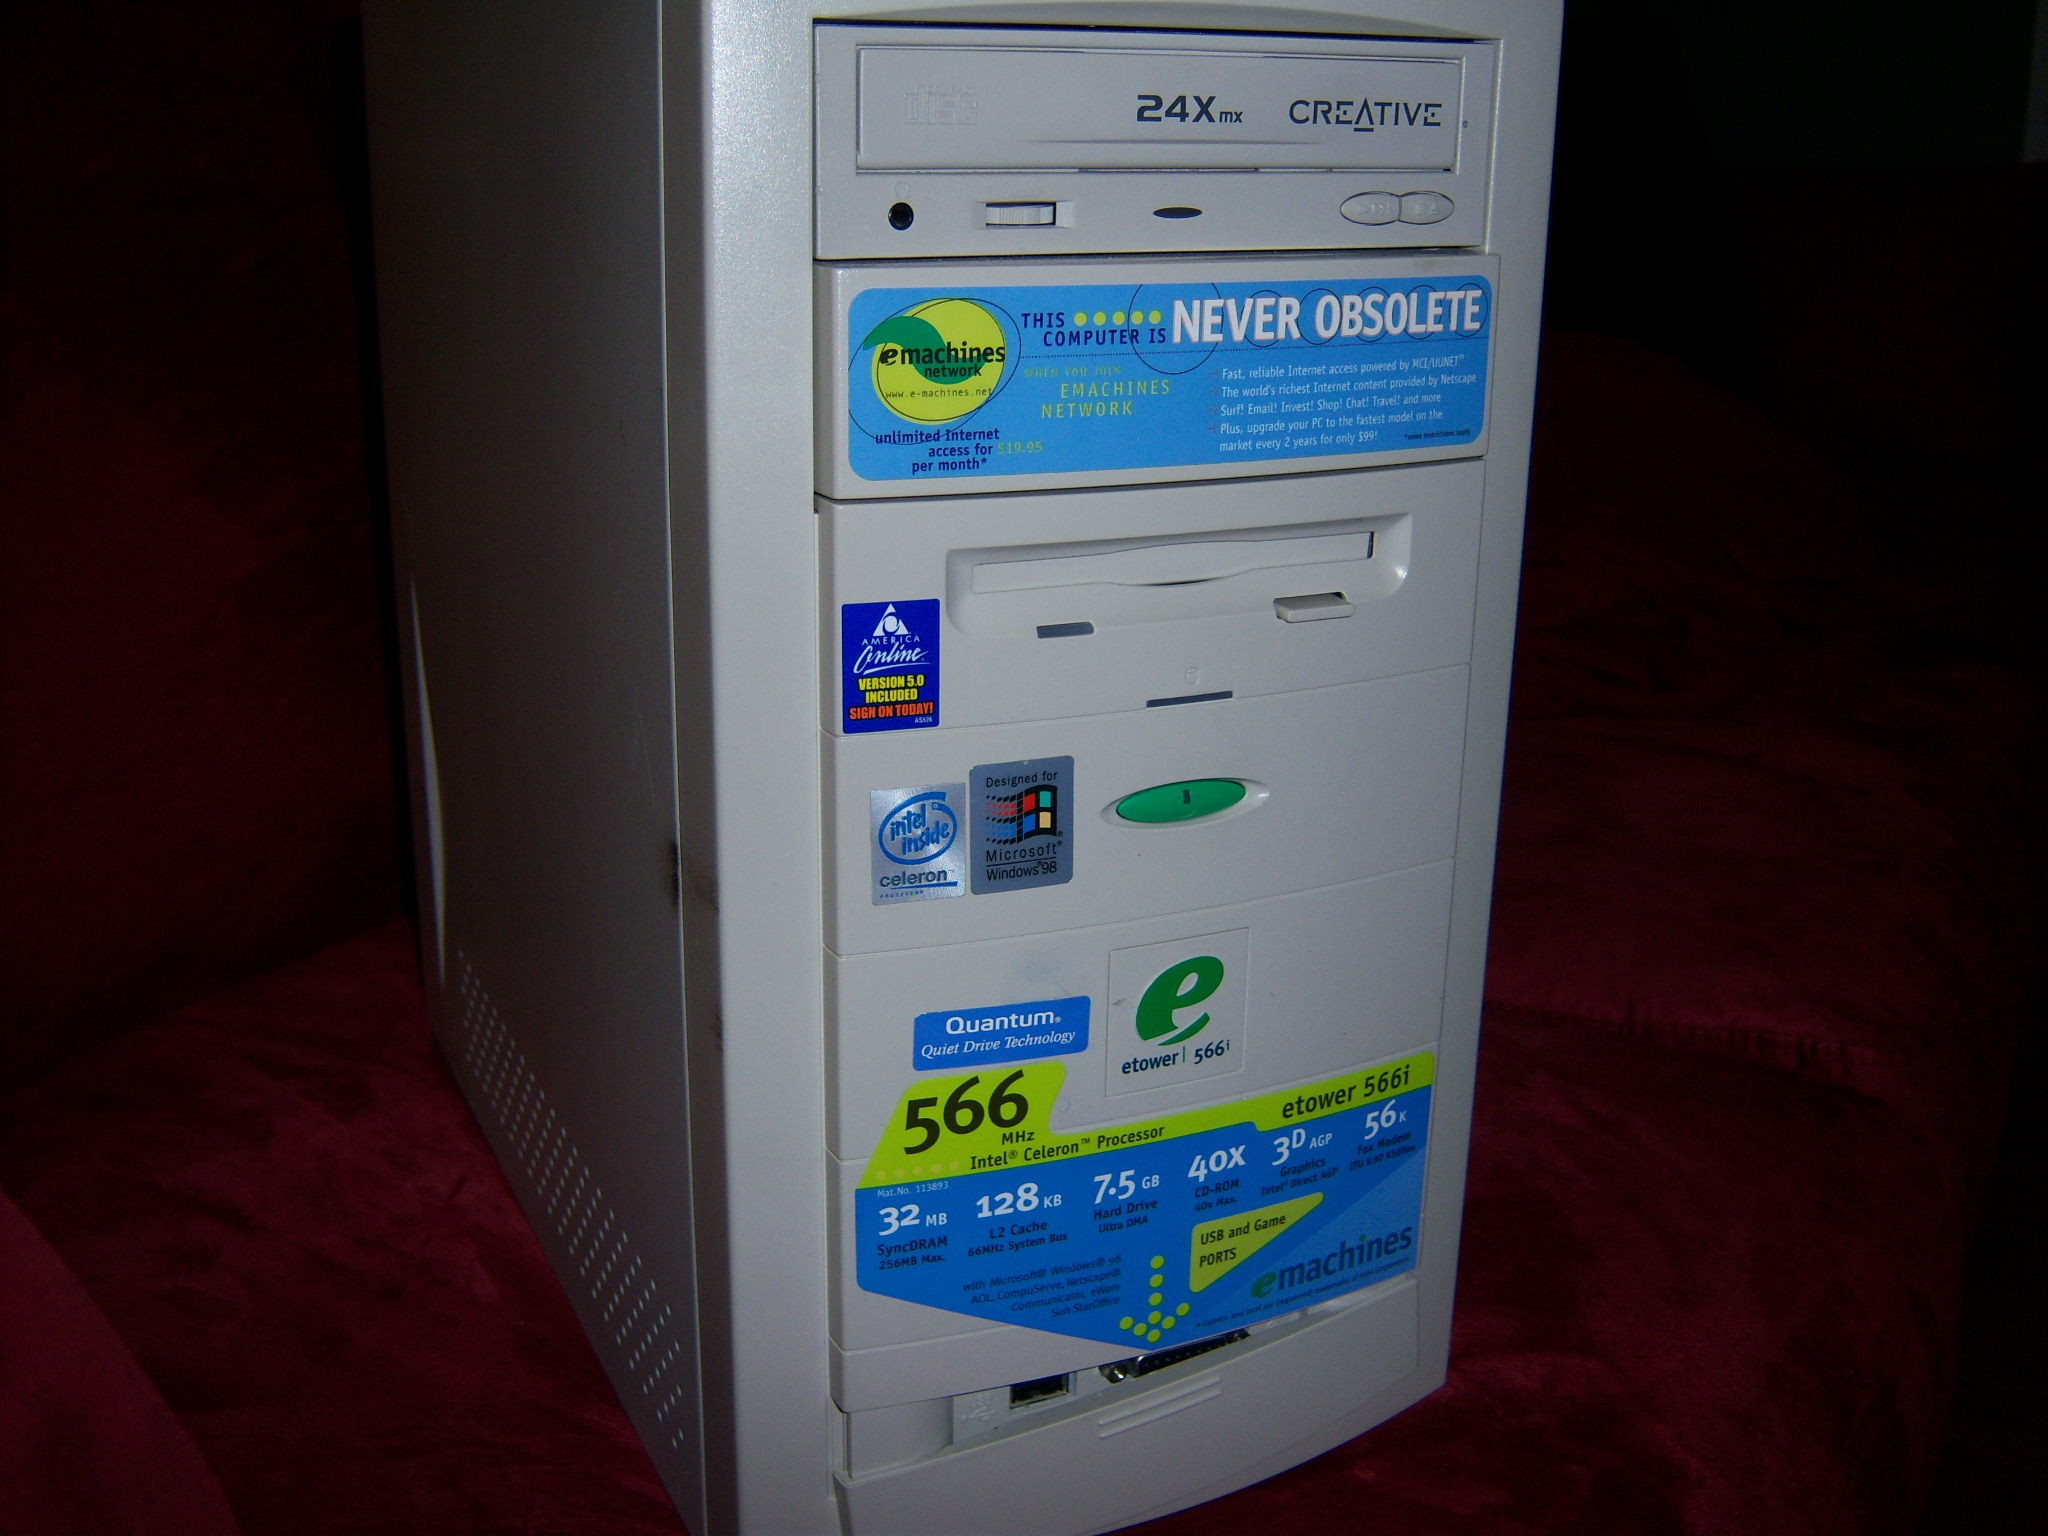 2048x1536 This computer is NEVER OBSOLETE!